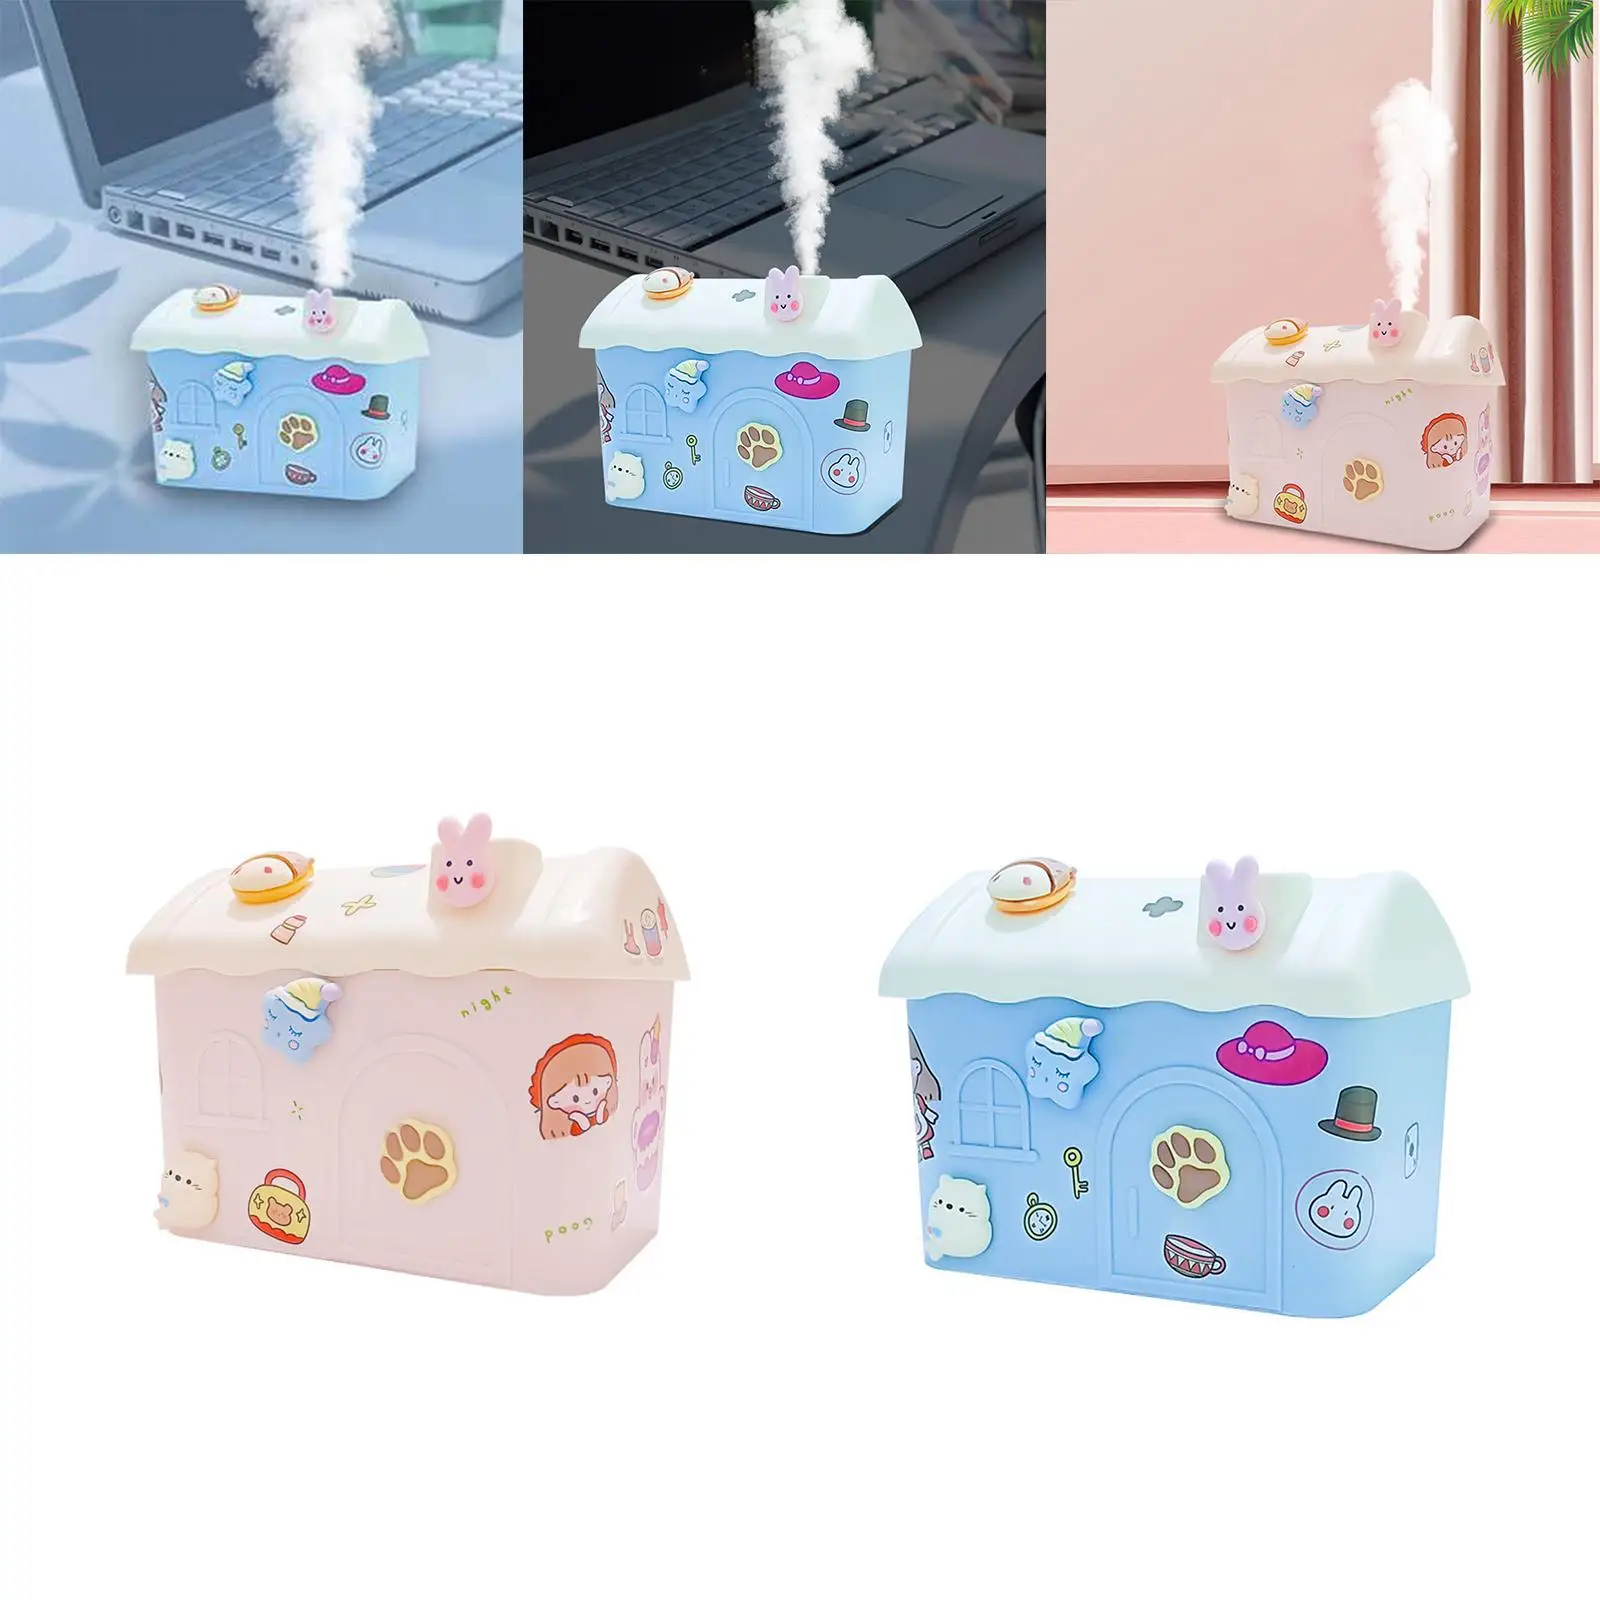 cool Mist Humidifier Operation USB Diffuser Air Humidifier Essential diffuser for Car Office Dorm Desktop